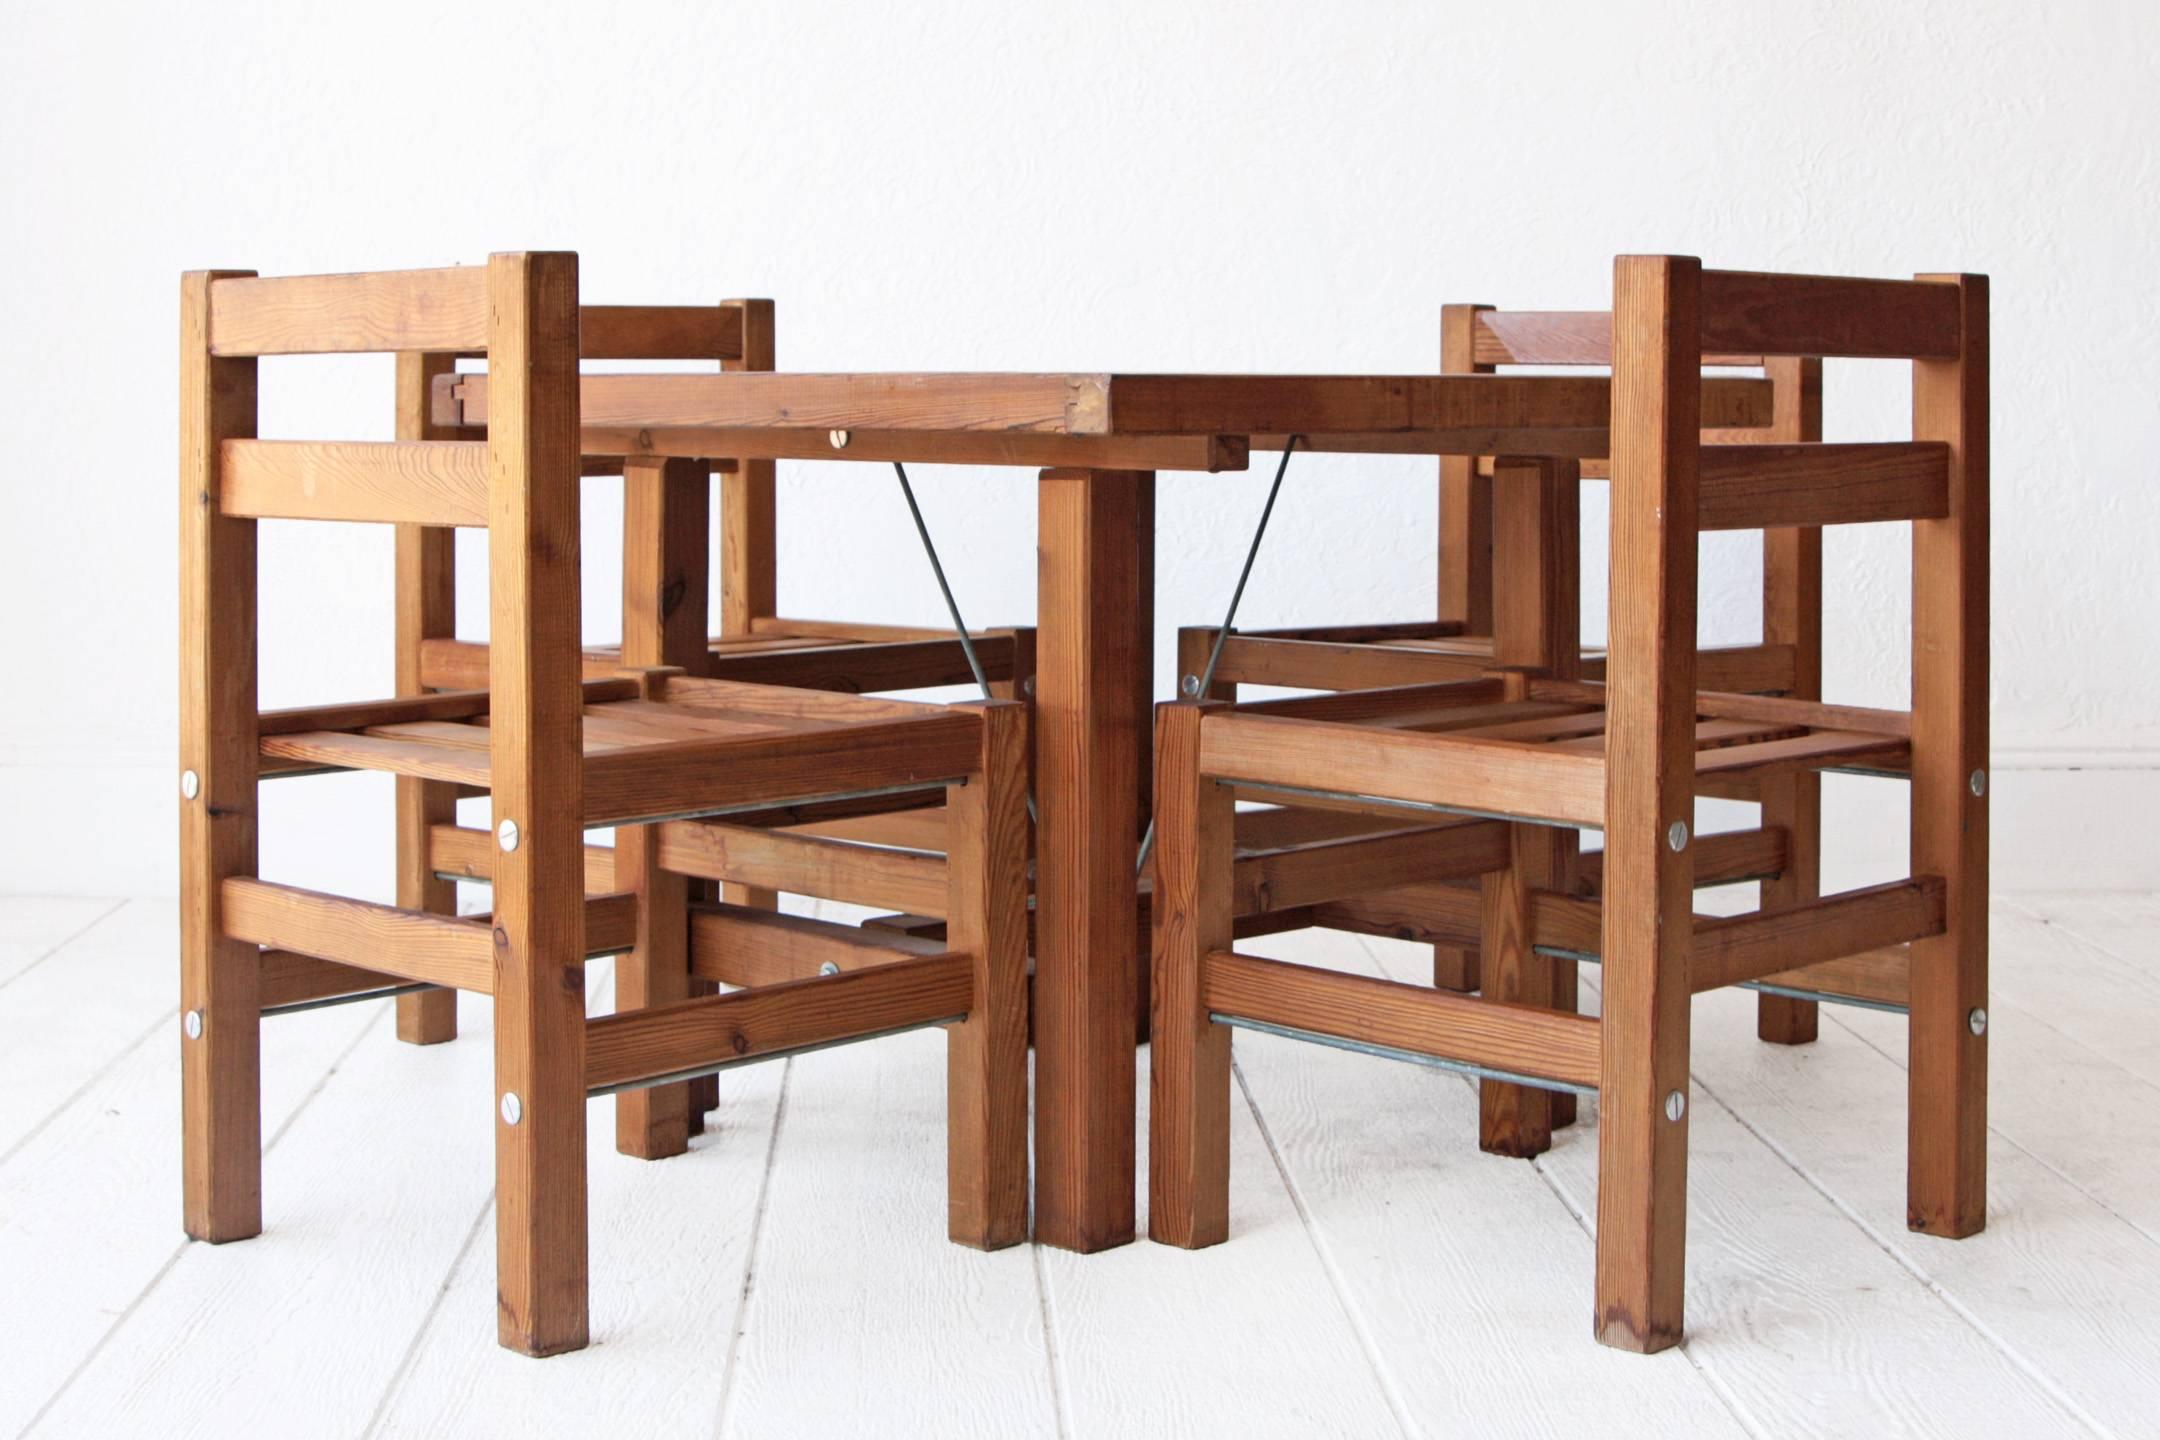 Solid redwood patio set by Elsa Stackelberg for Fri Form, Sweden. Diminutive dining table with hole for umbrella and four chairs. Custom cushions can be made upon request for an additional price.
Measures:
Table: 31.5